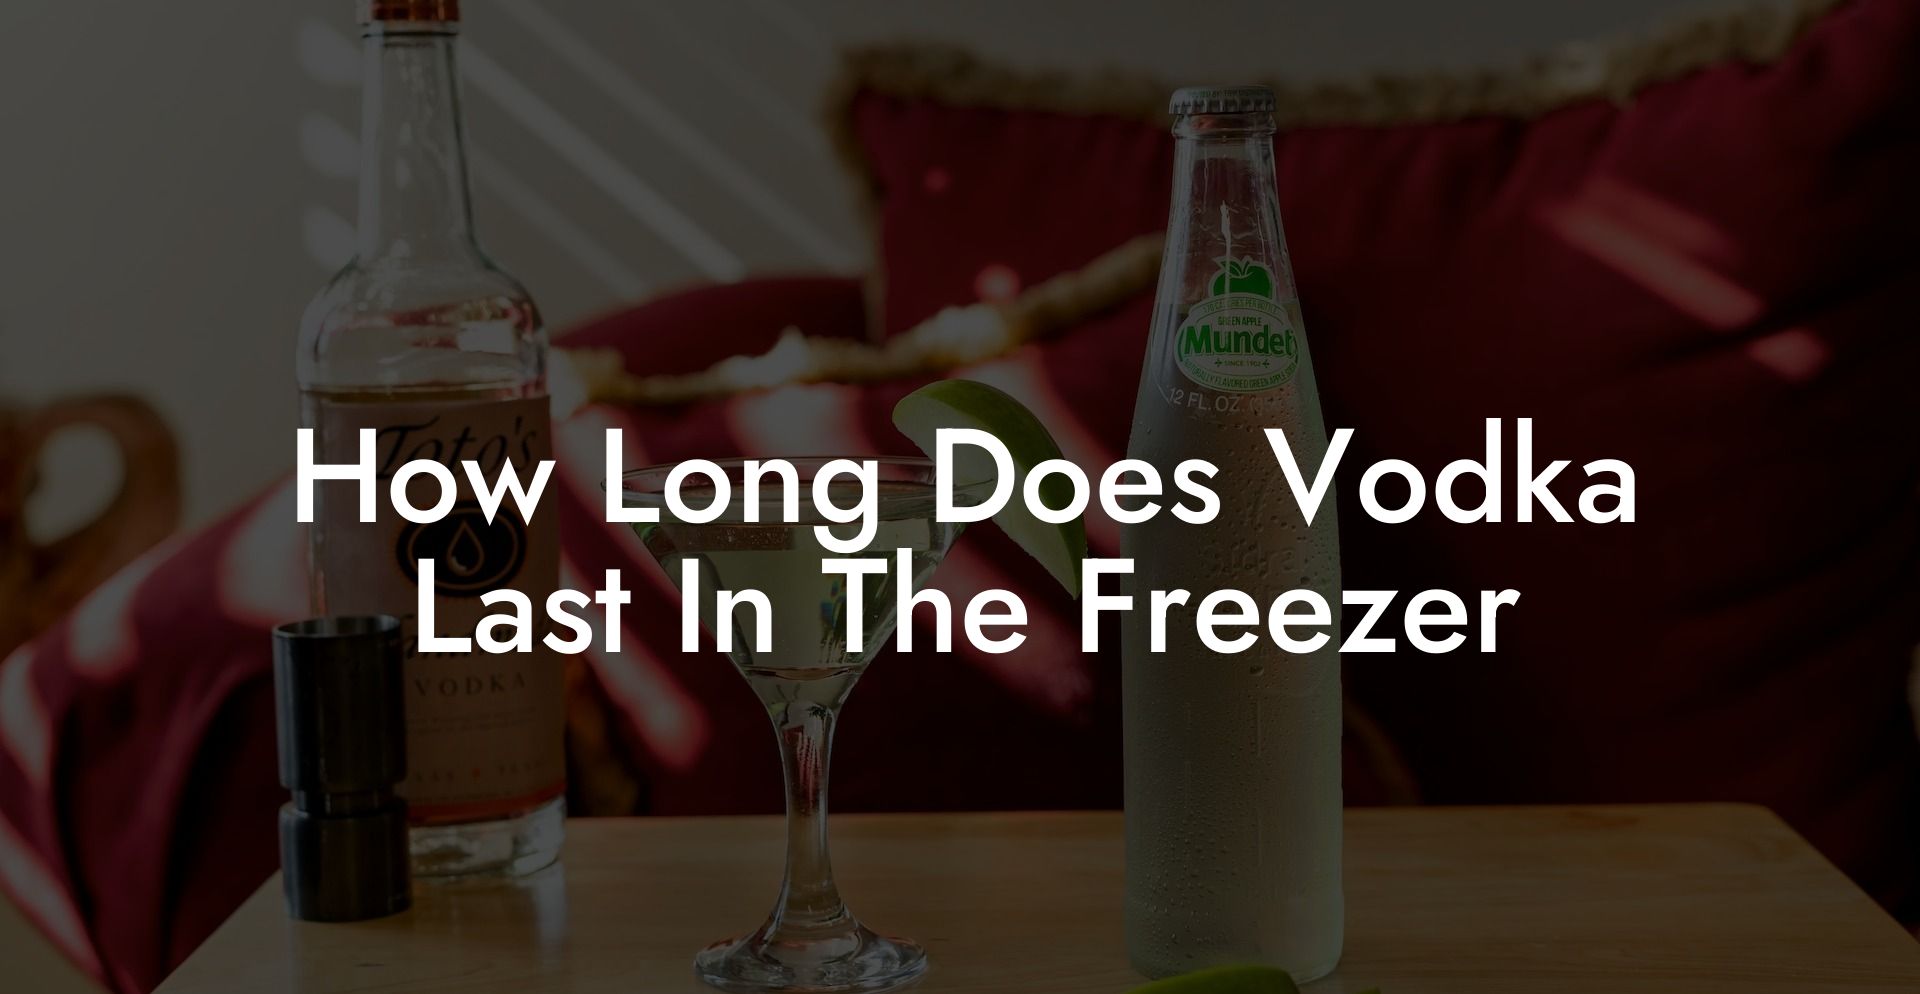 How Long Does Vodka Last In The Freezer